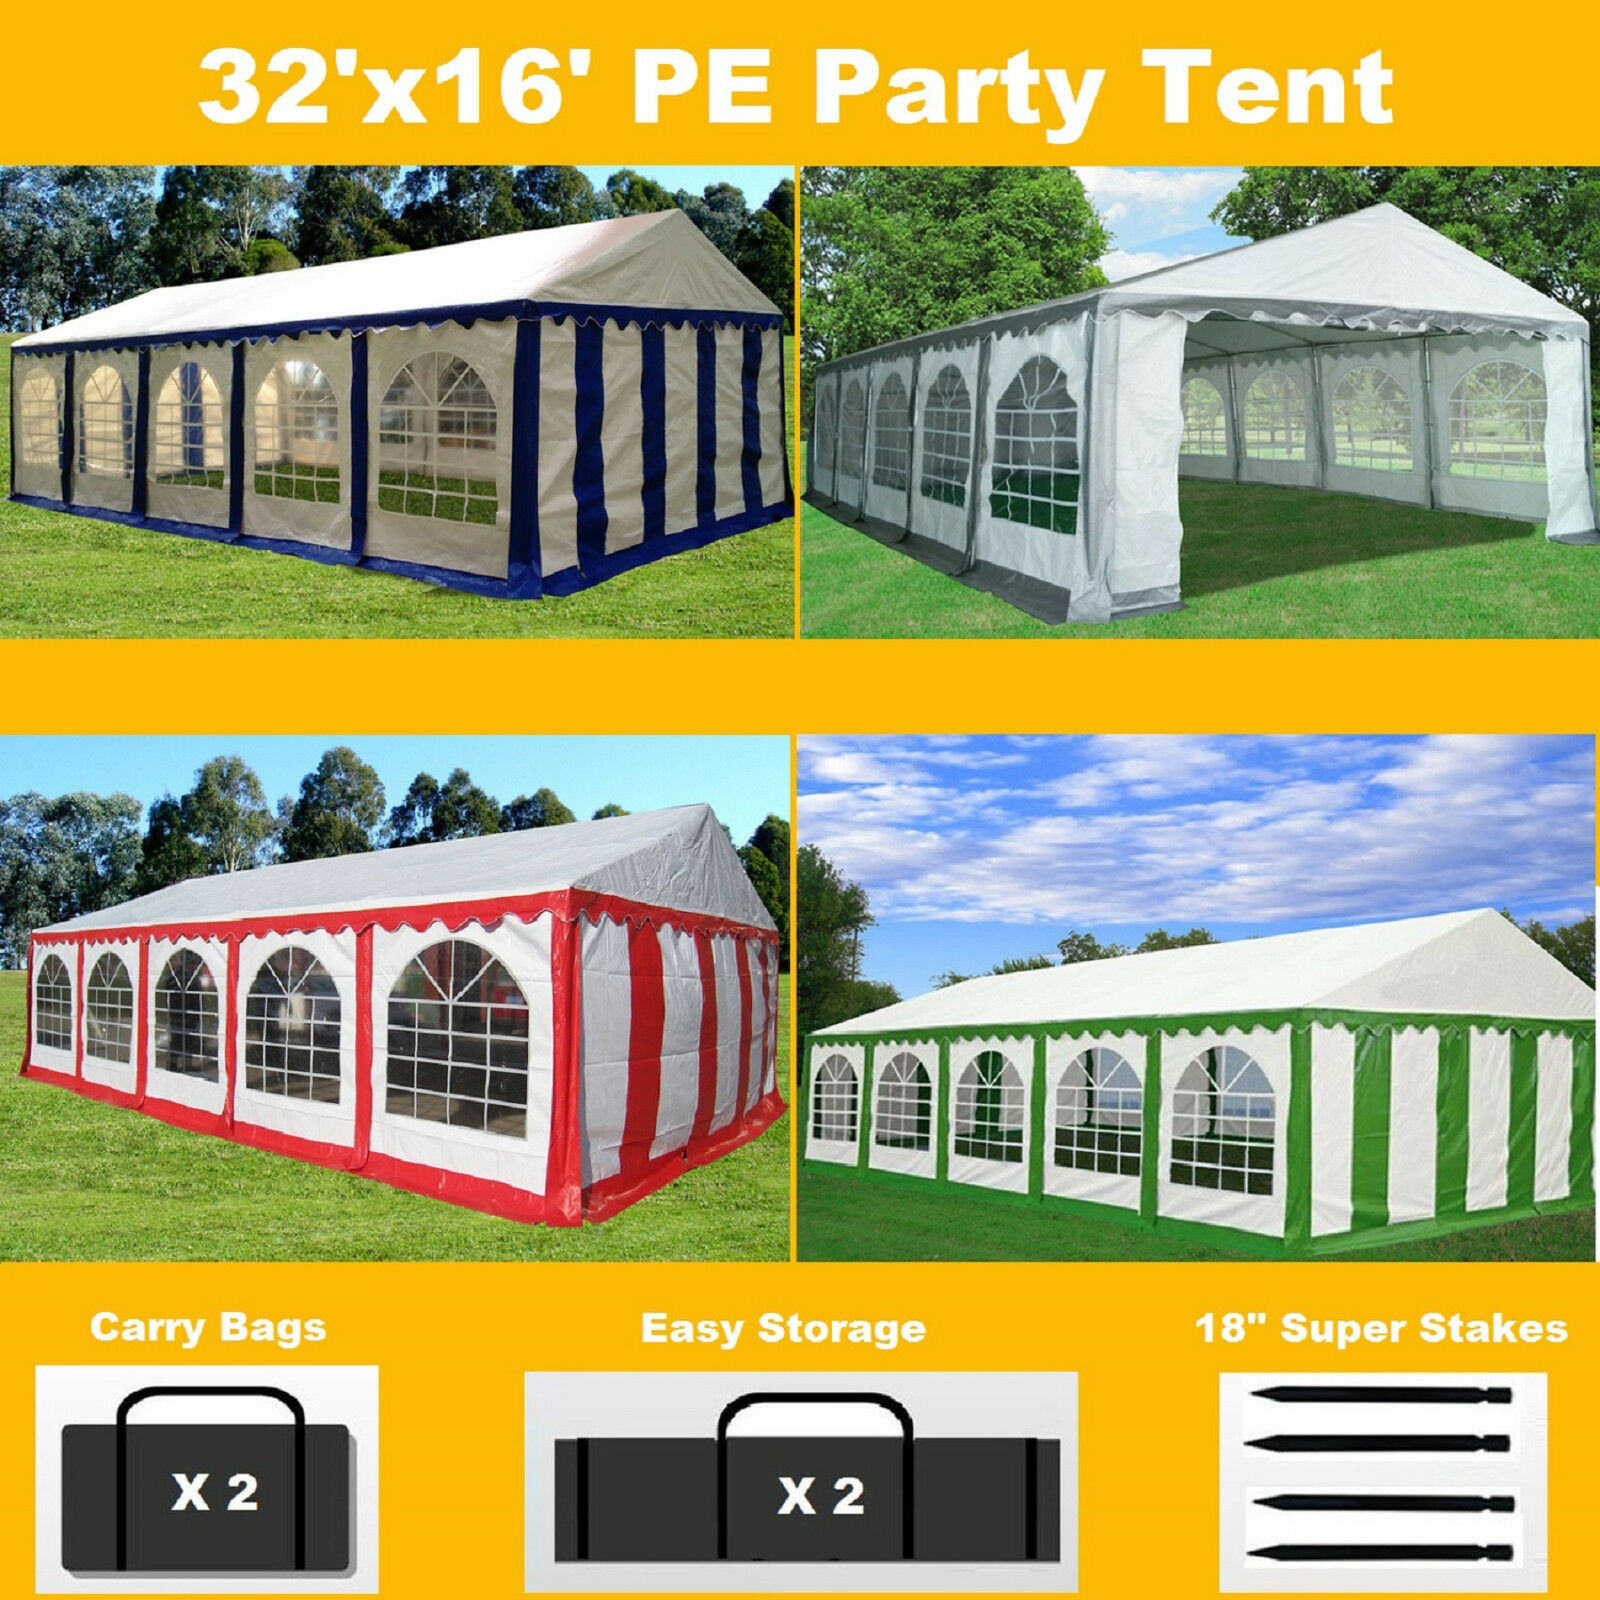 32 x 16 Striped Party Tent Canopy Gazebo - 4 Colors - Red ...